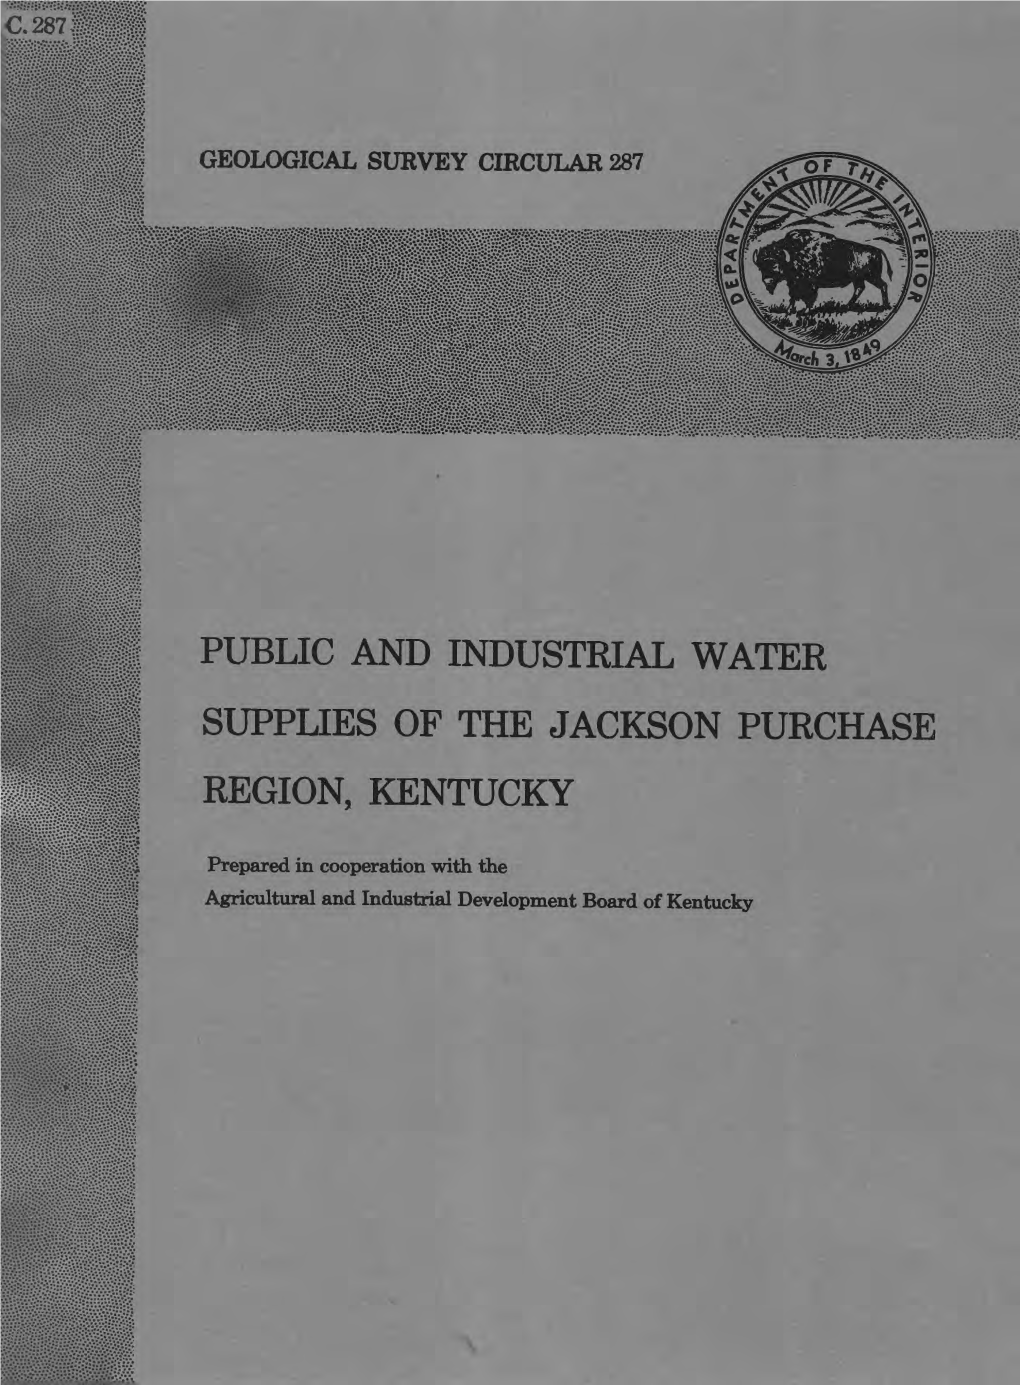 Public and Industrial Water Supplies of the Jackson Purchase Region, Kentucky